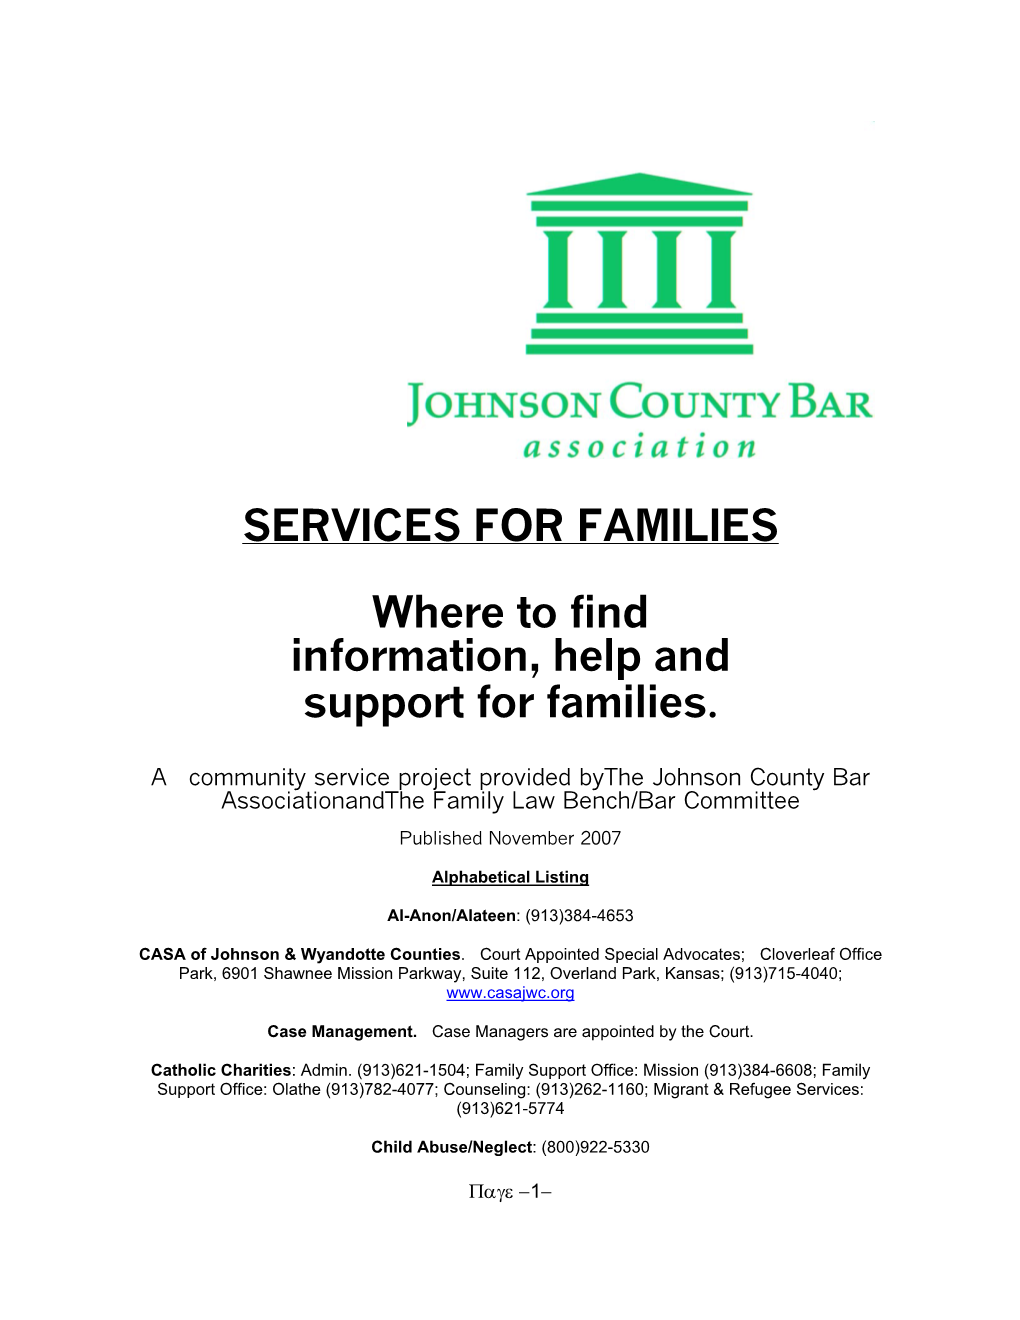 SERVICES for FAMILIES Where to Find Information, Help and Support for Families